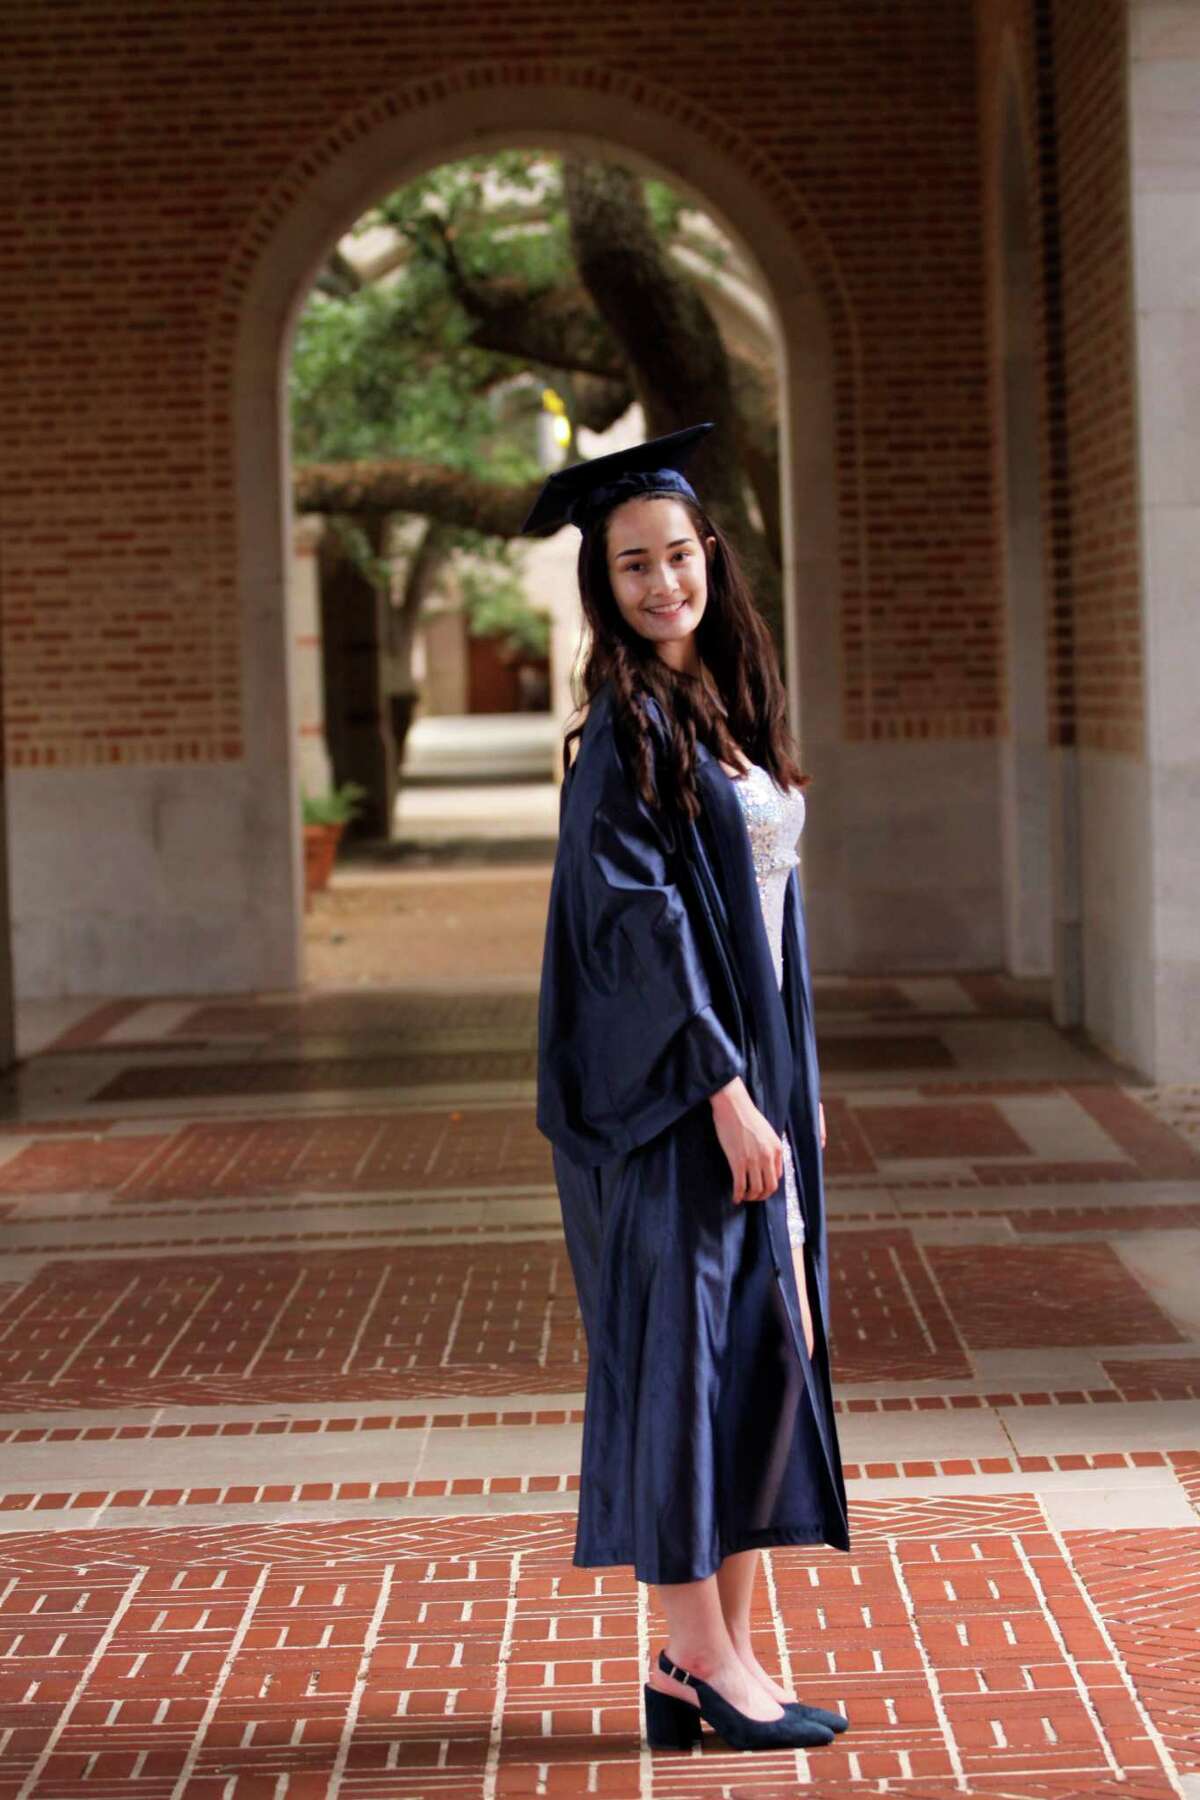 Class of 2022 Klein Collins graduate Katrina Machetta plans to double major in business and communications.